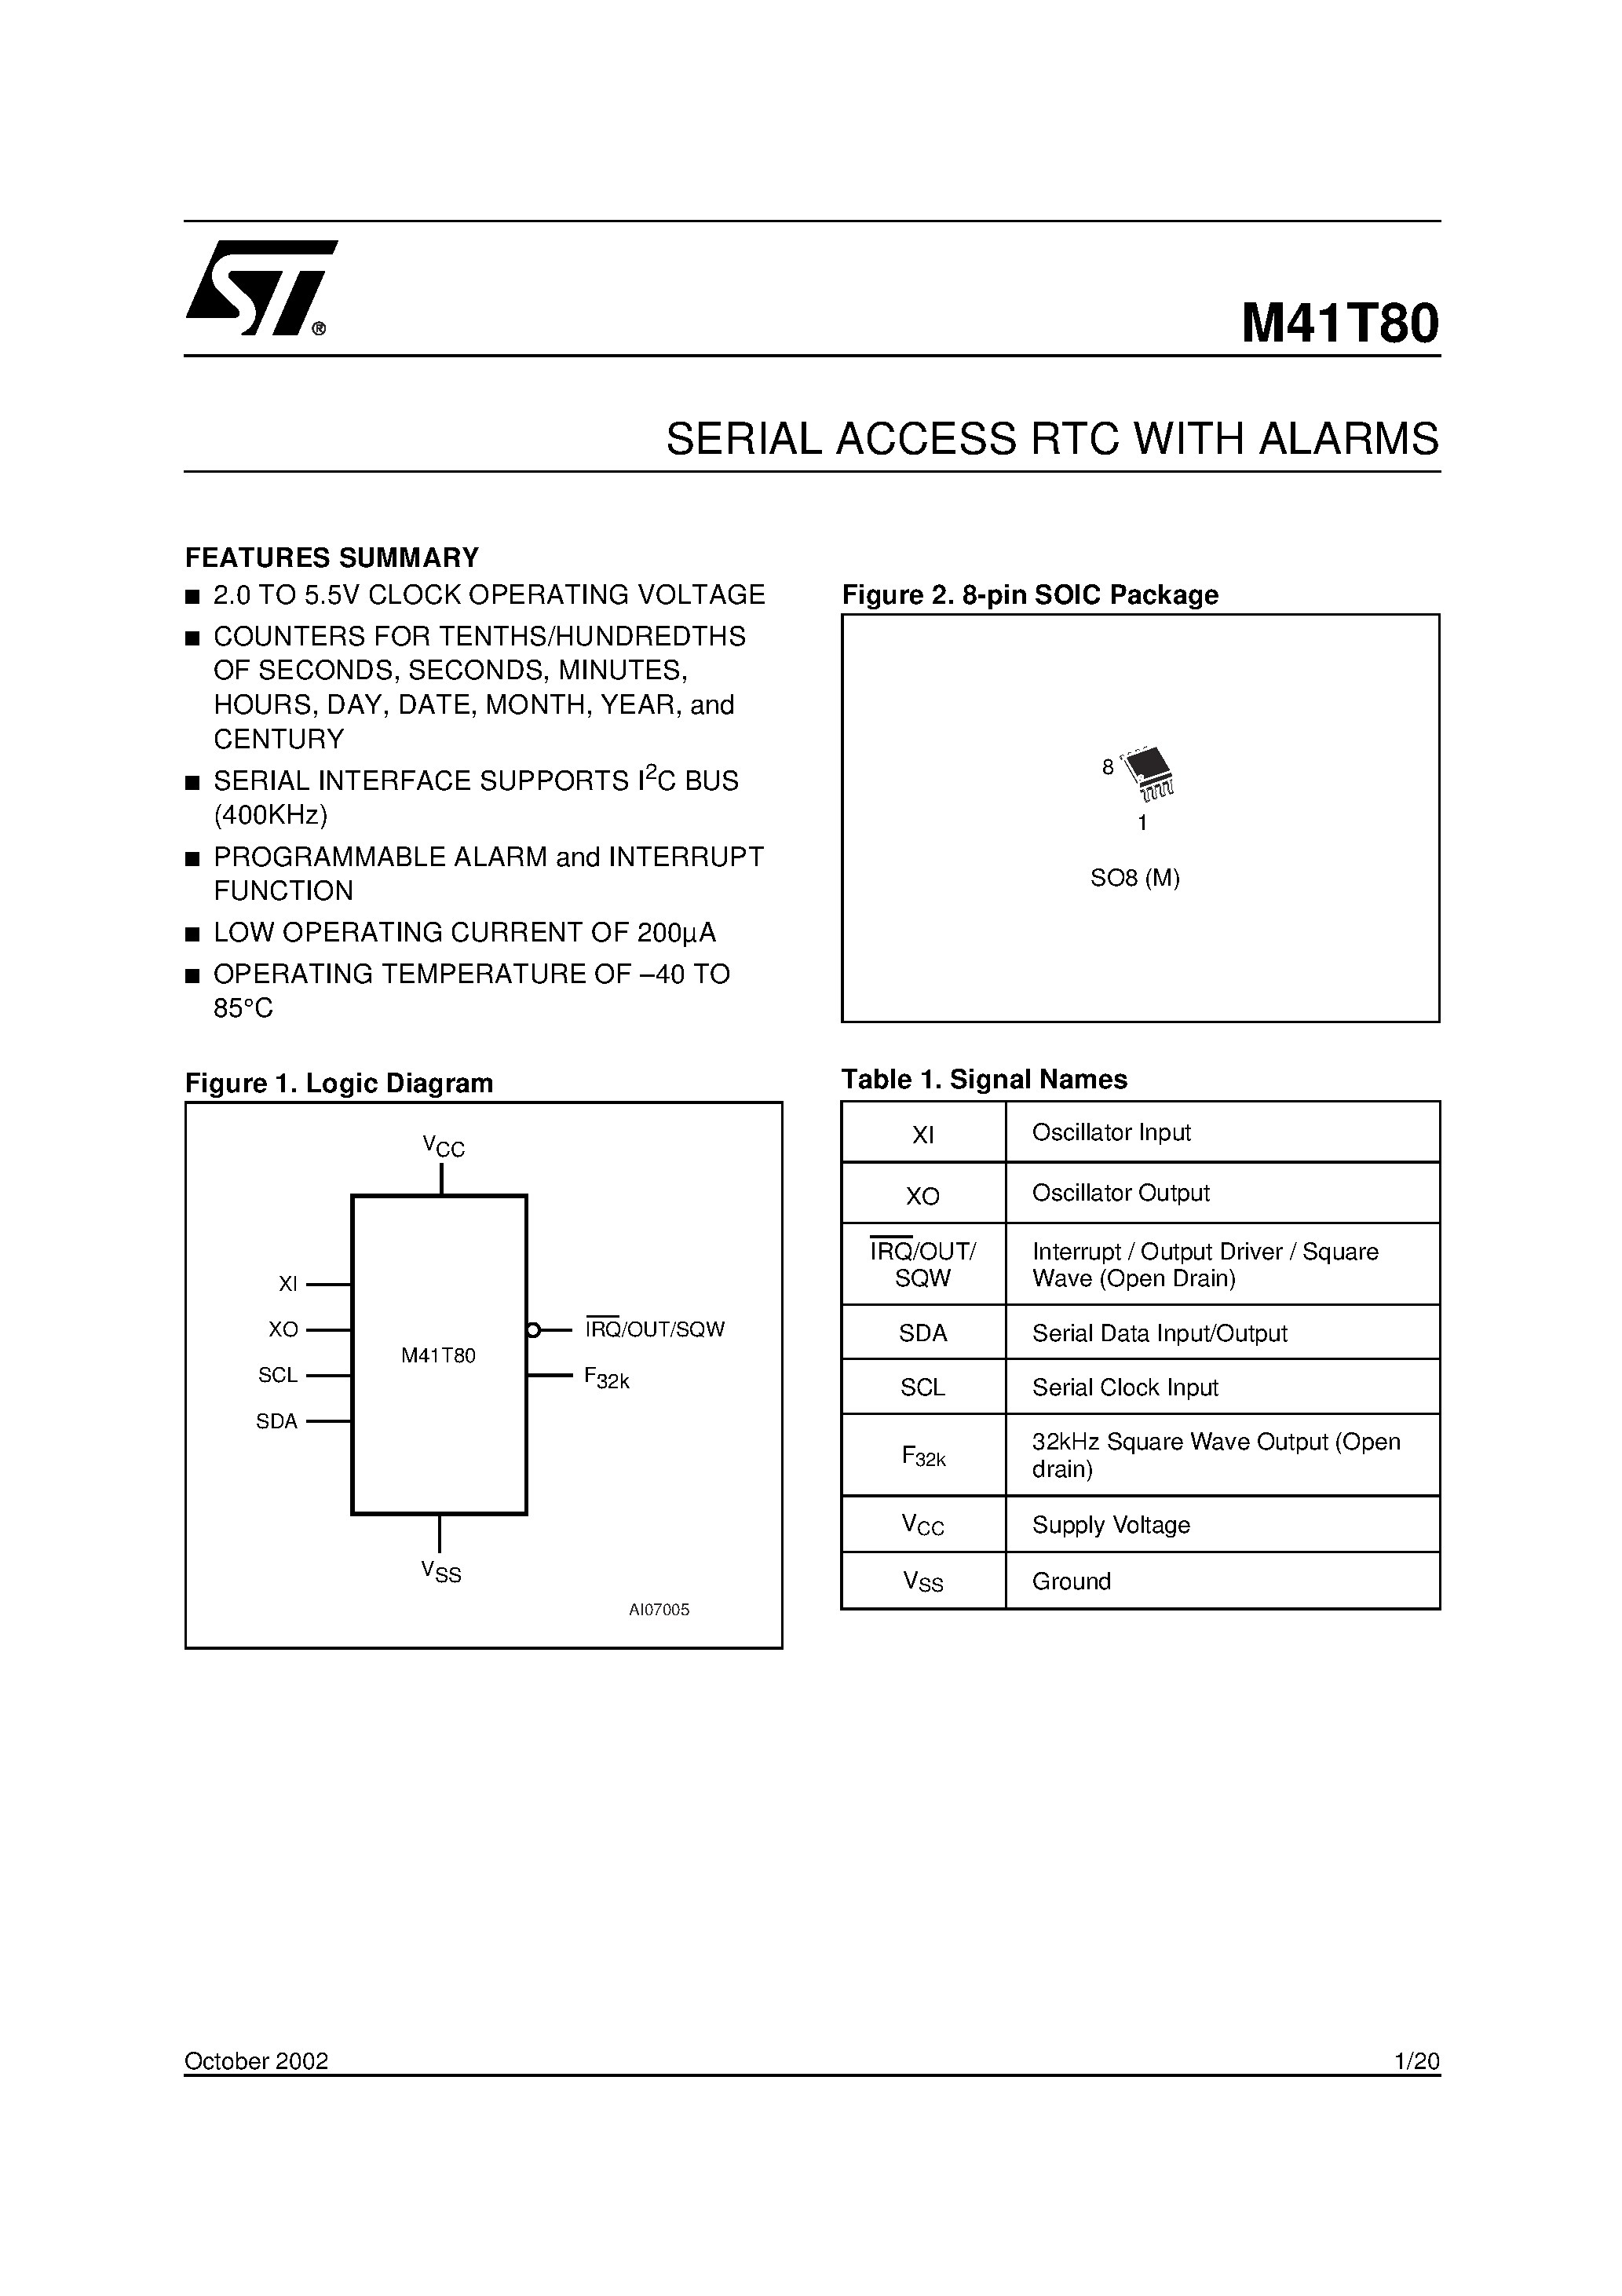 Datasheet M41T80M - SERIAL ACCESS RTC WITH ALARMS page 1